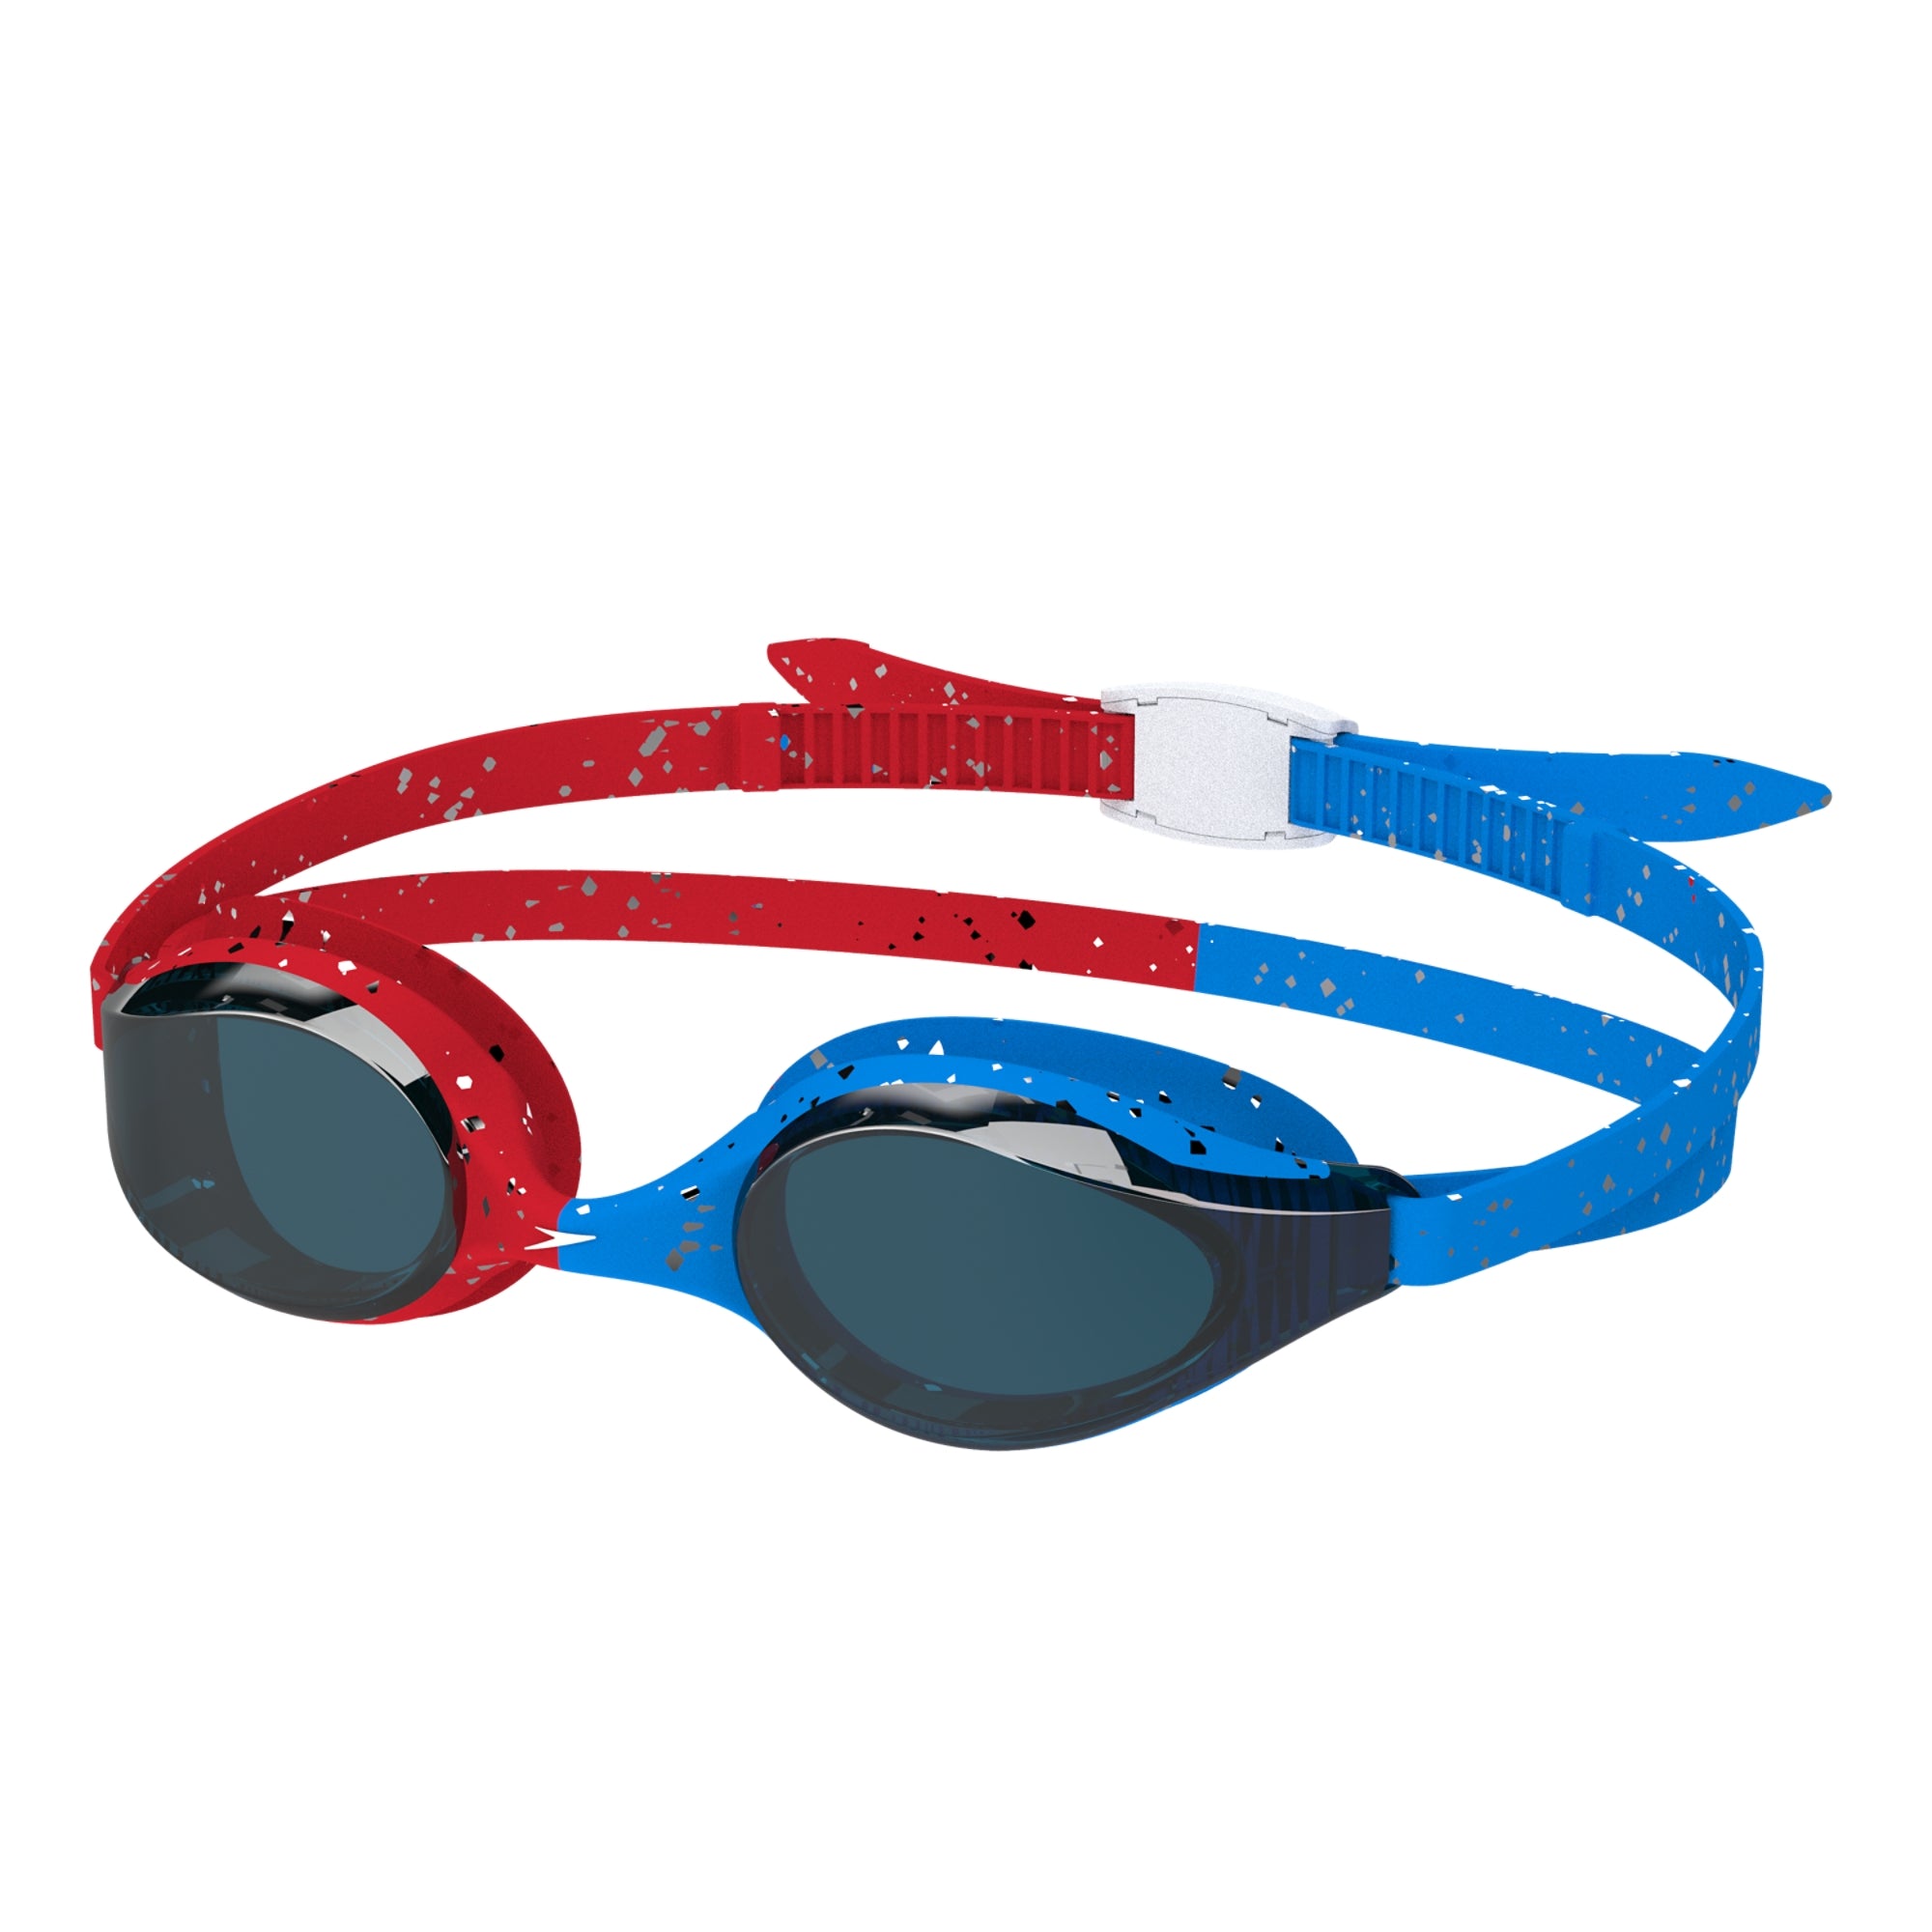 Speedo Hyper Flyer Goggle (Limited Edition)